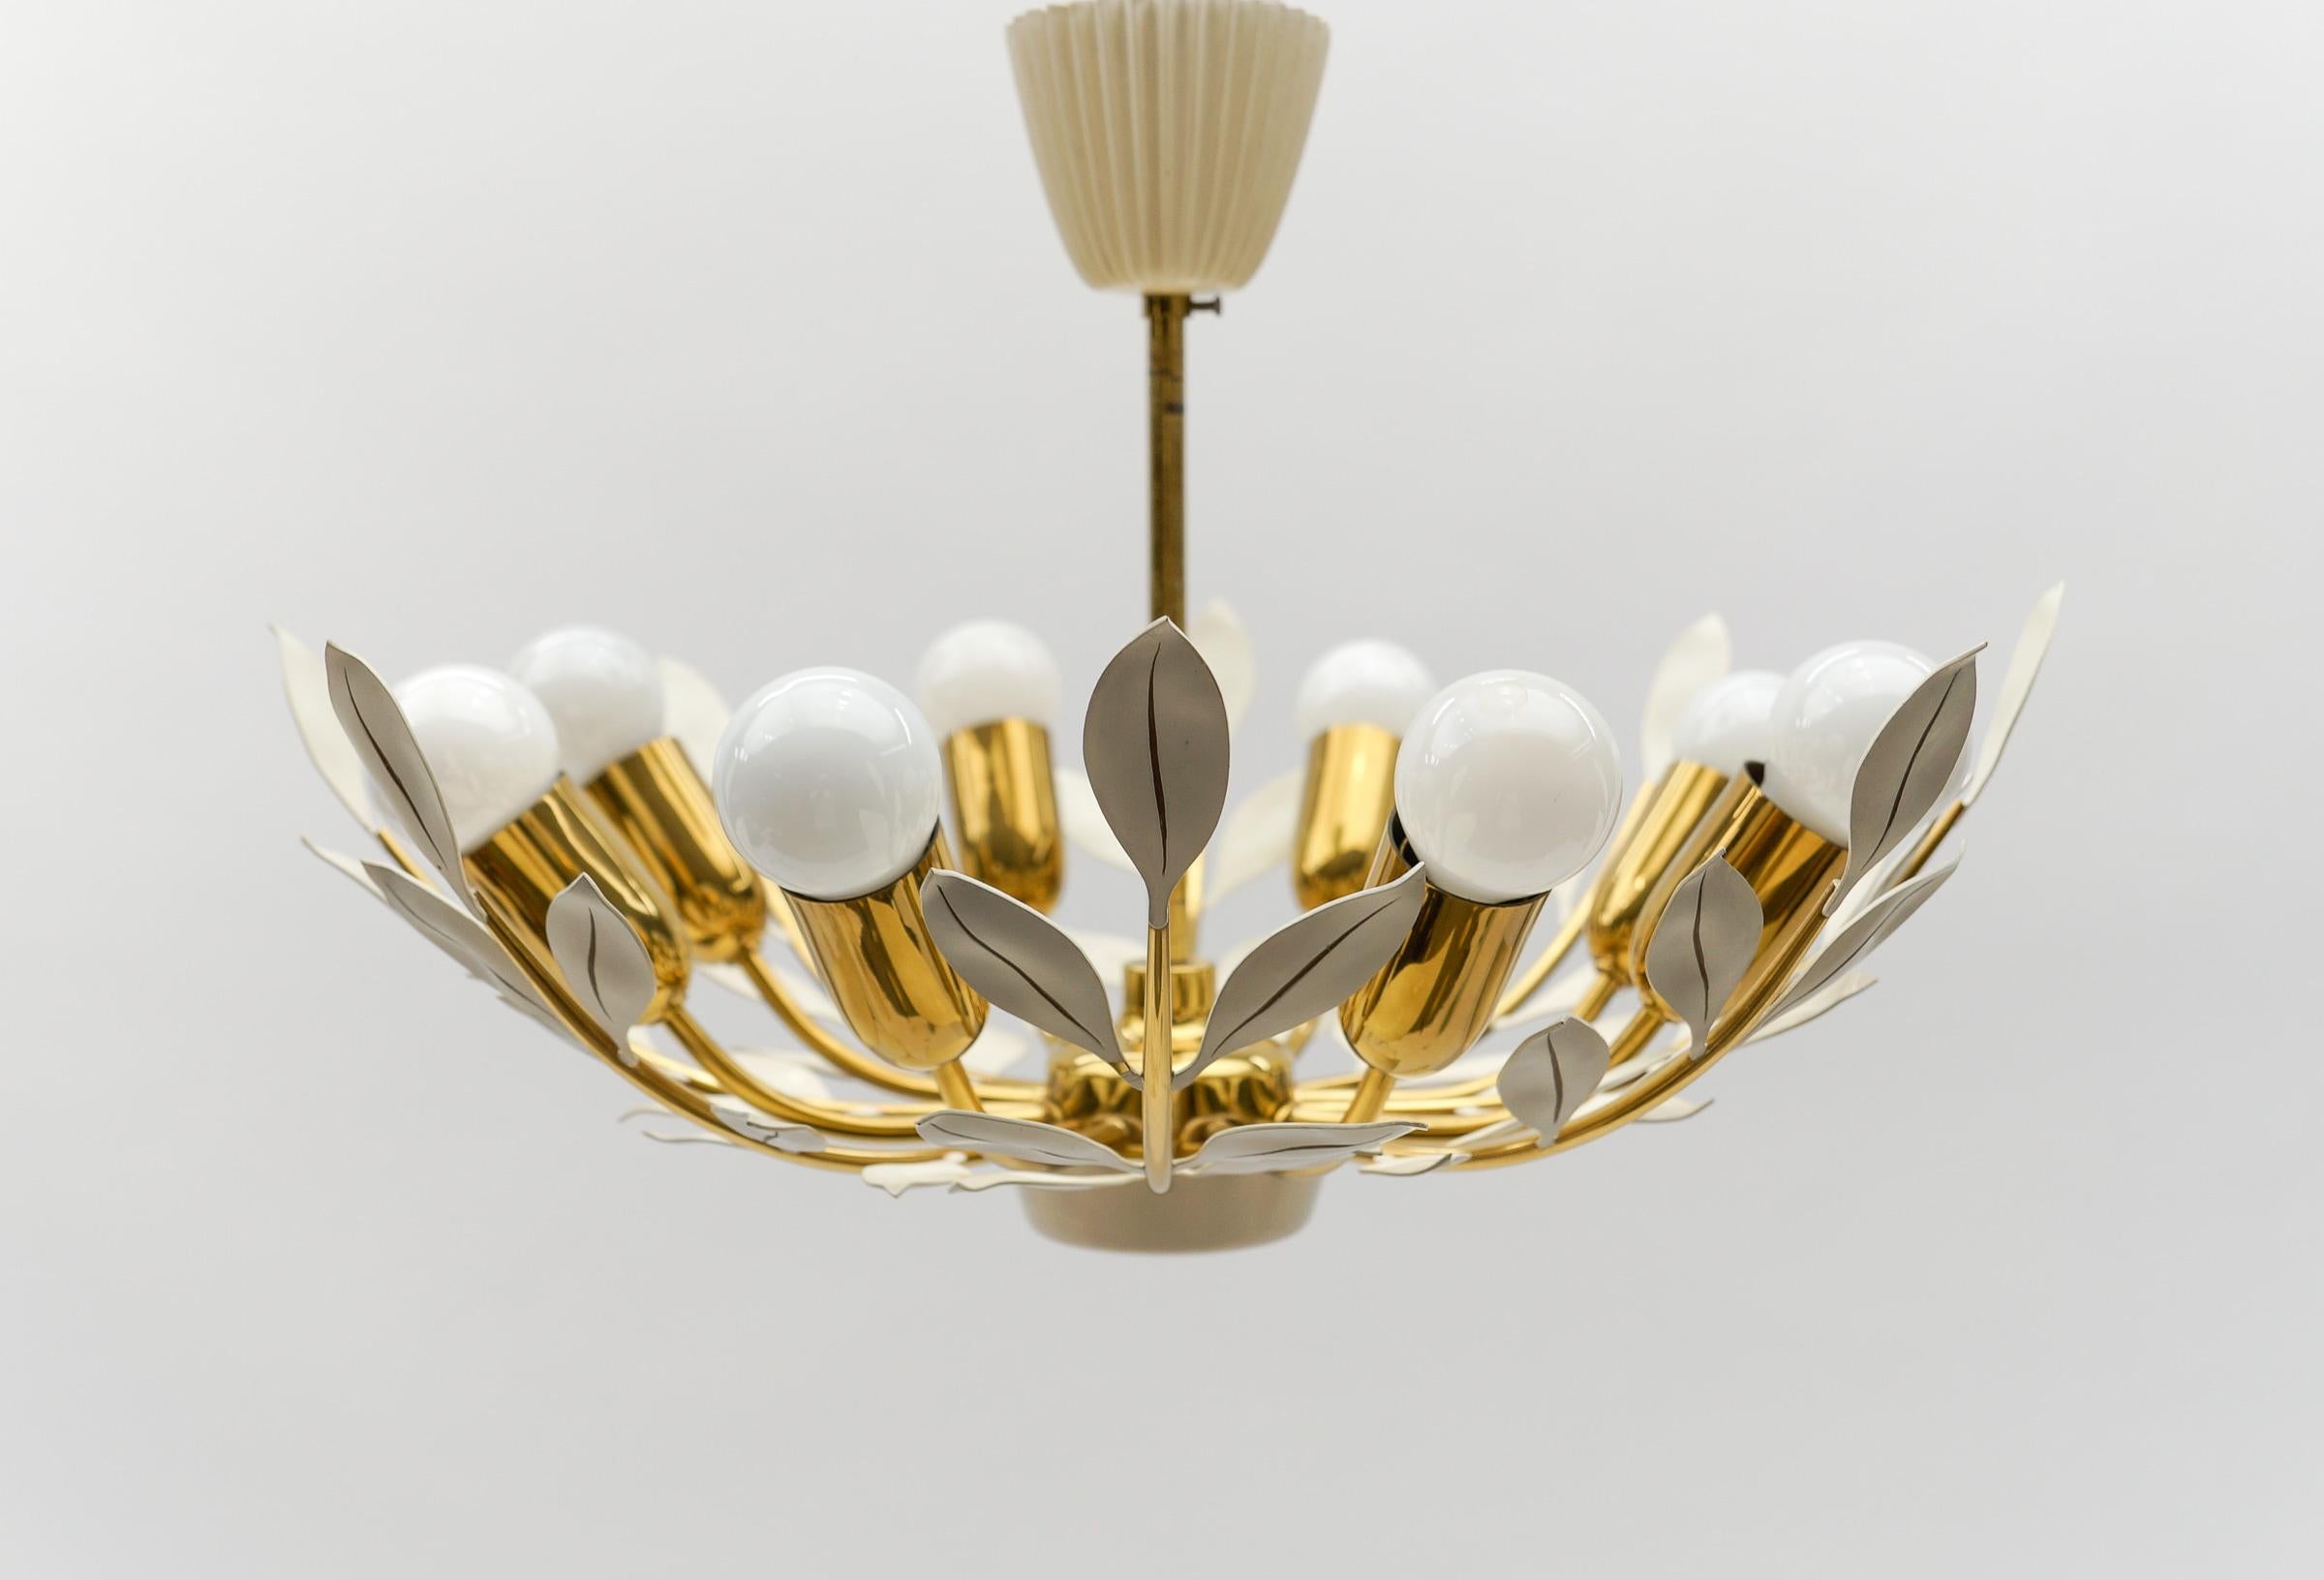 1. of 2 Lovely Ceiling Lamp by Vereinigte Werkstätten München, 1950s Germany

This awesome ceiling lamp was produced in Germany by Vereinigte Werkstätten München in the 1950s.

Each fixture needs 8 x E14 standard bulb.

Light bulbs are not